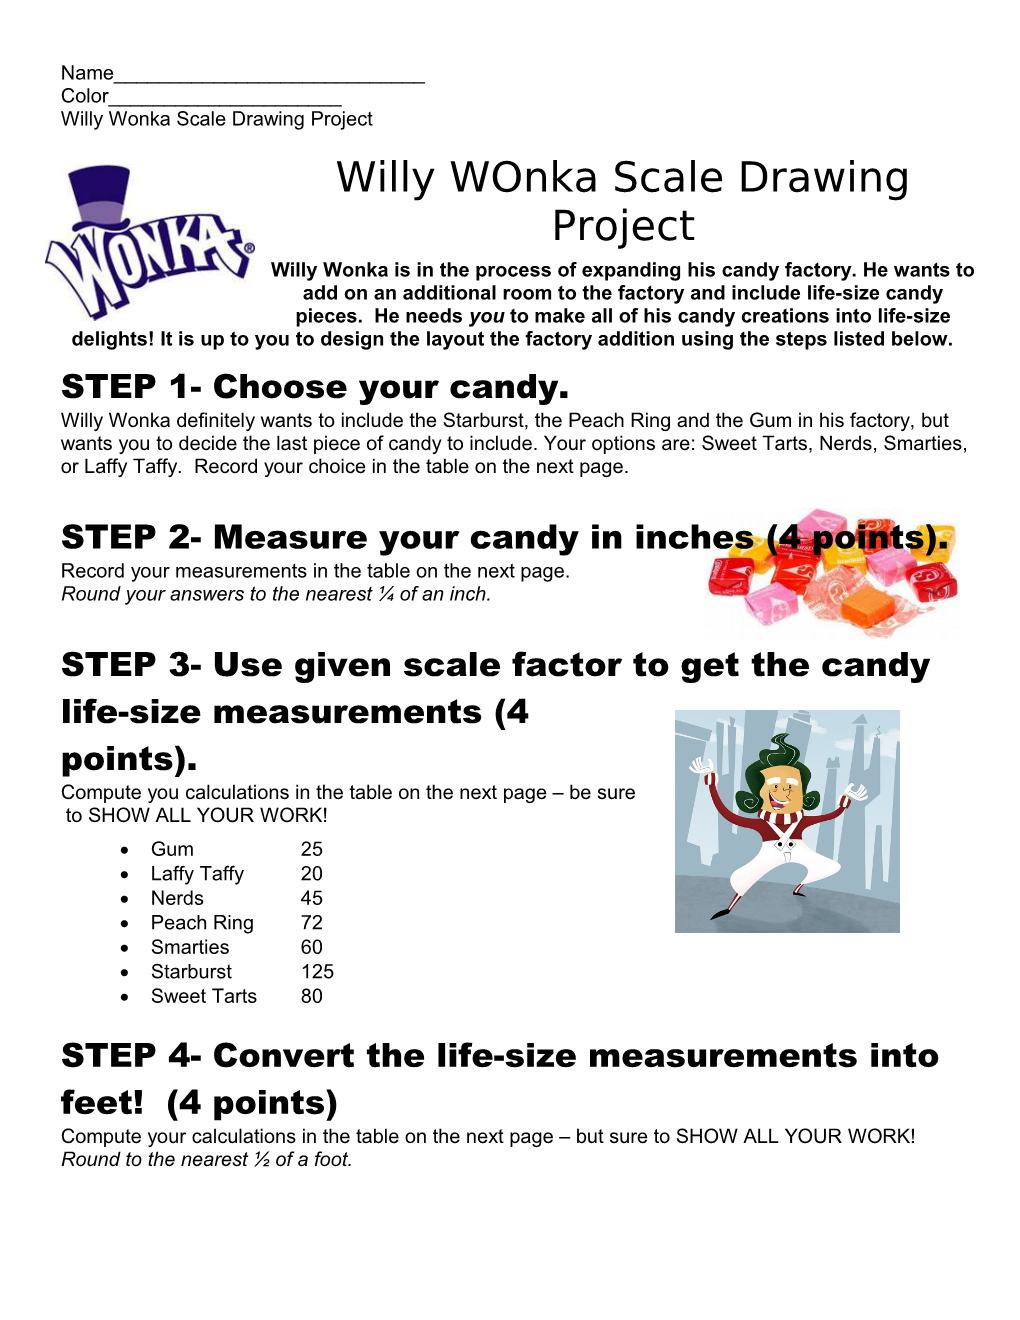 Willy Wonka Scale Drawing Project